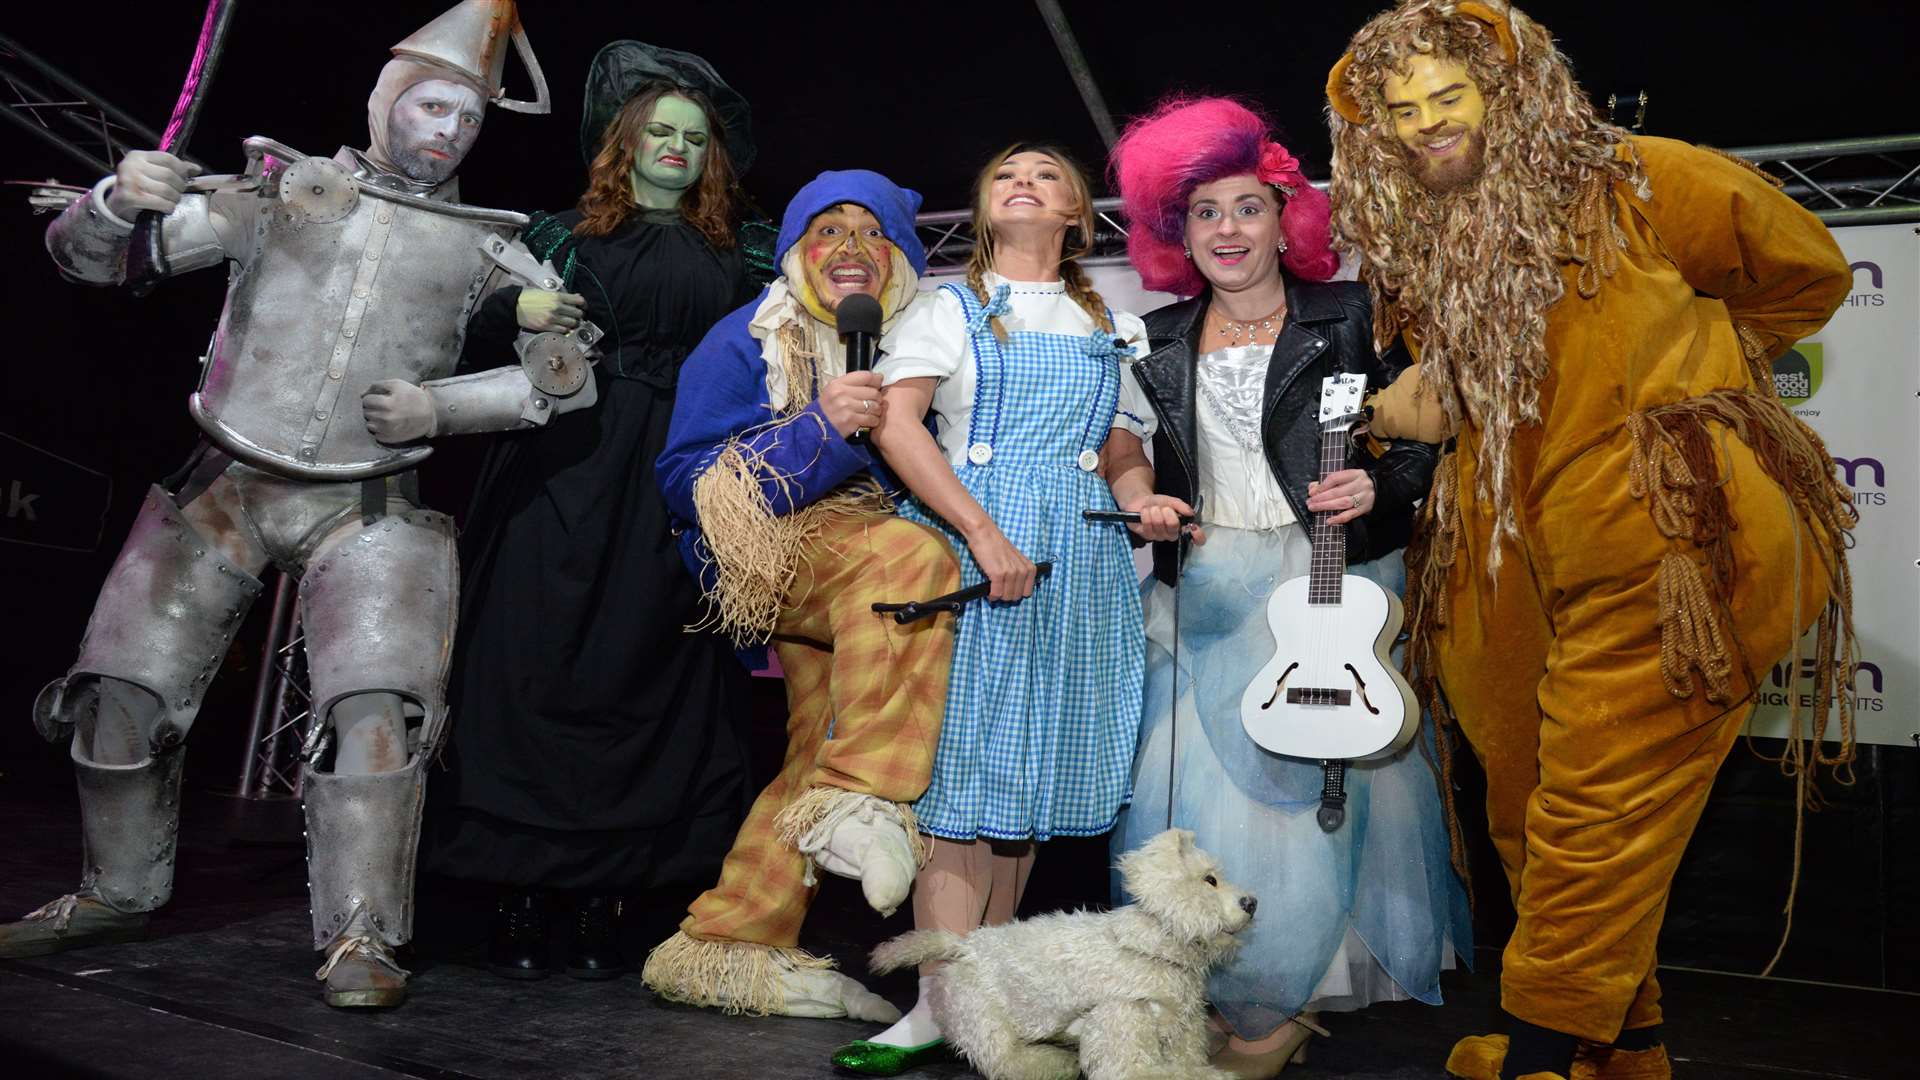 The cast of the Margate Theatre Royal's panto 'Wizard of Oz' were on hand to entertain